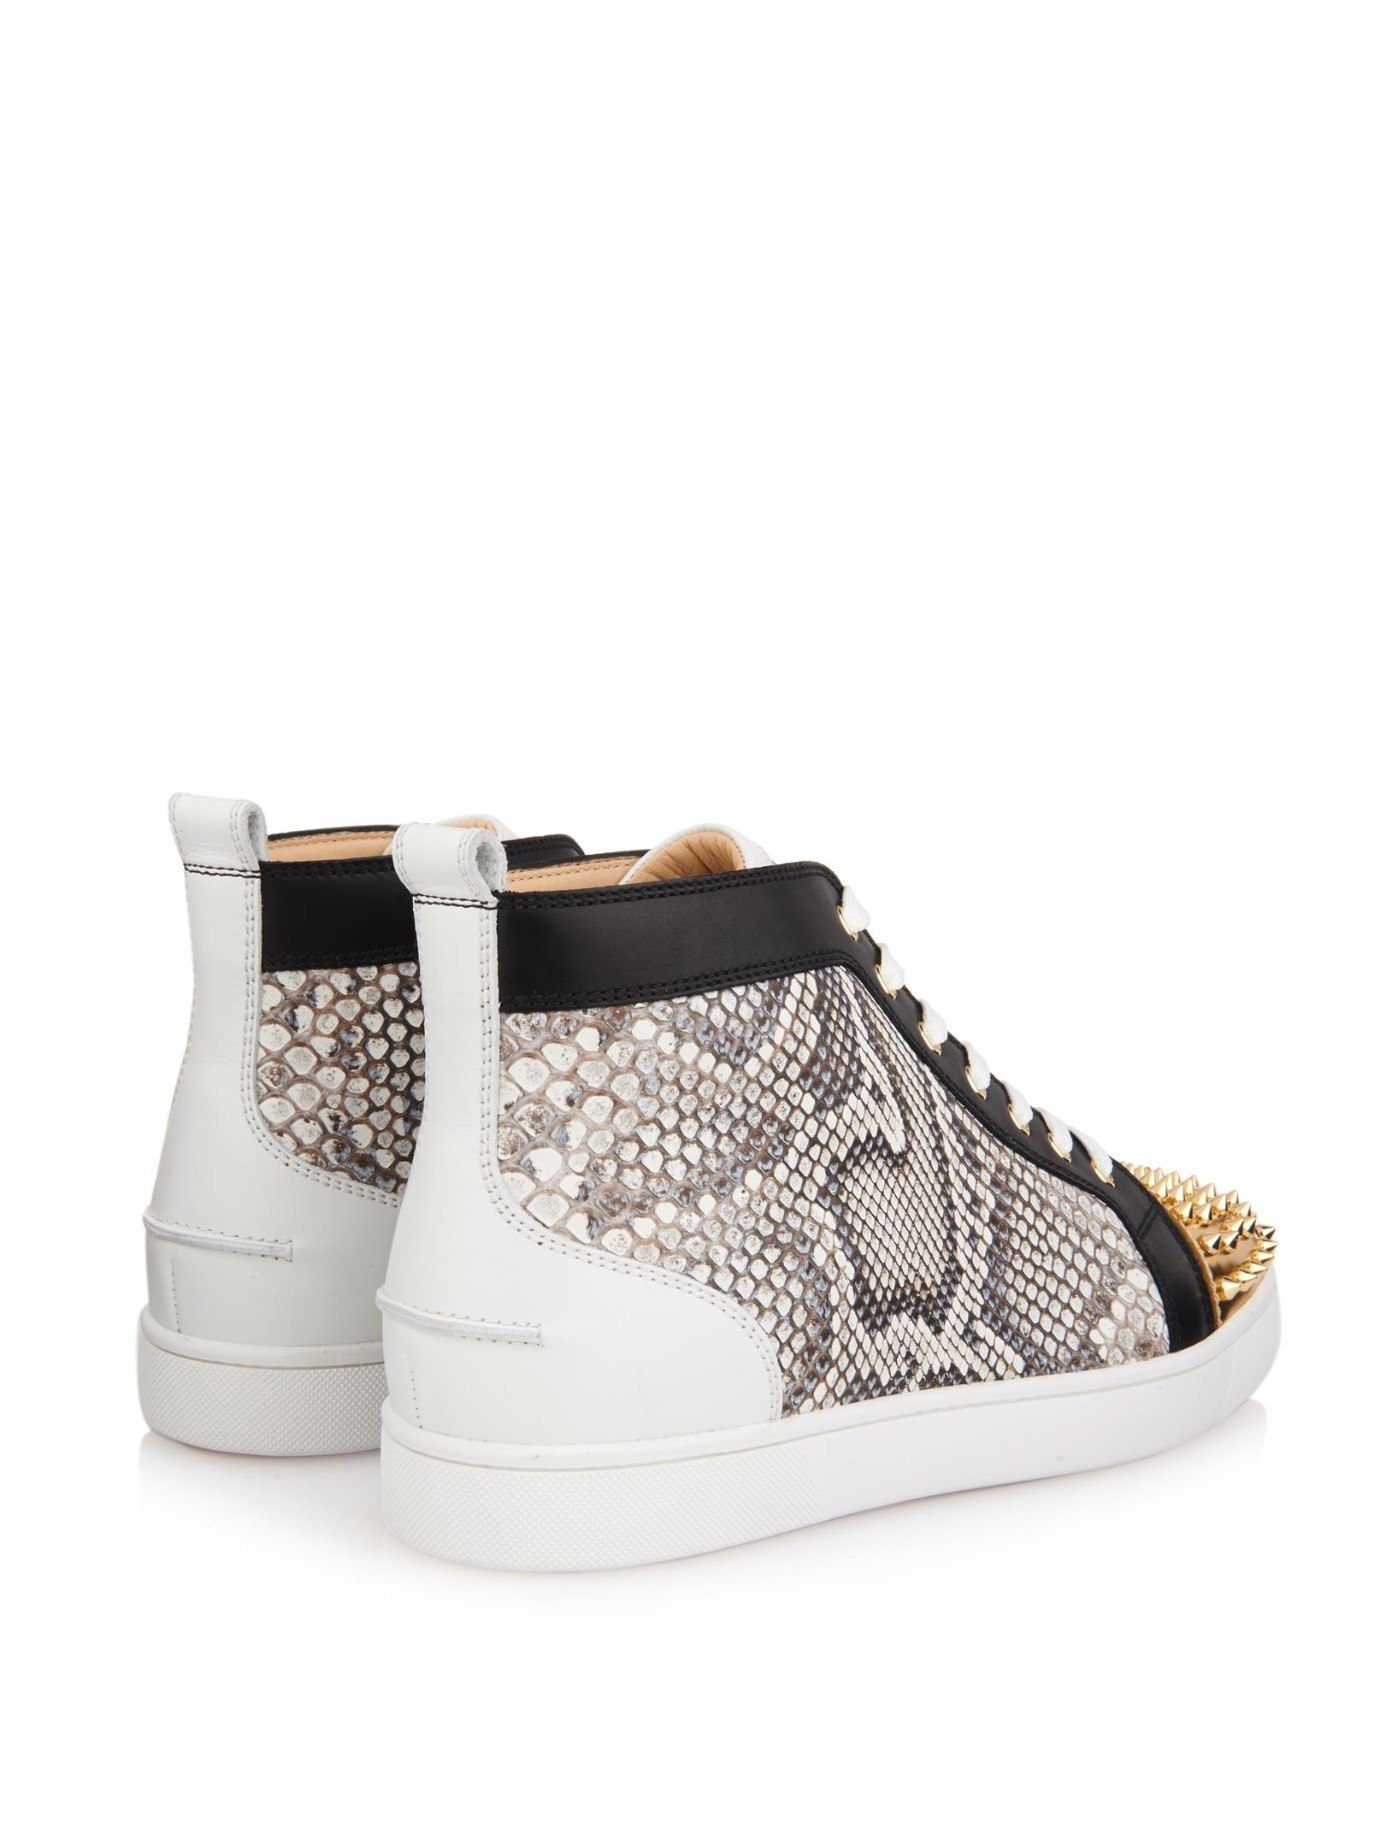 Christian Louboutin Lou Python and Leather Sneakers in Yellow for Men - Lyst